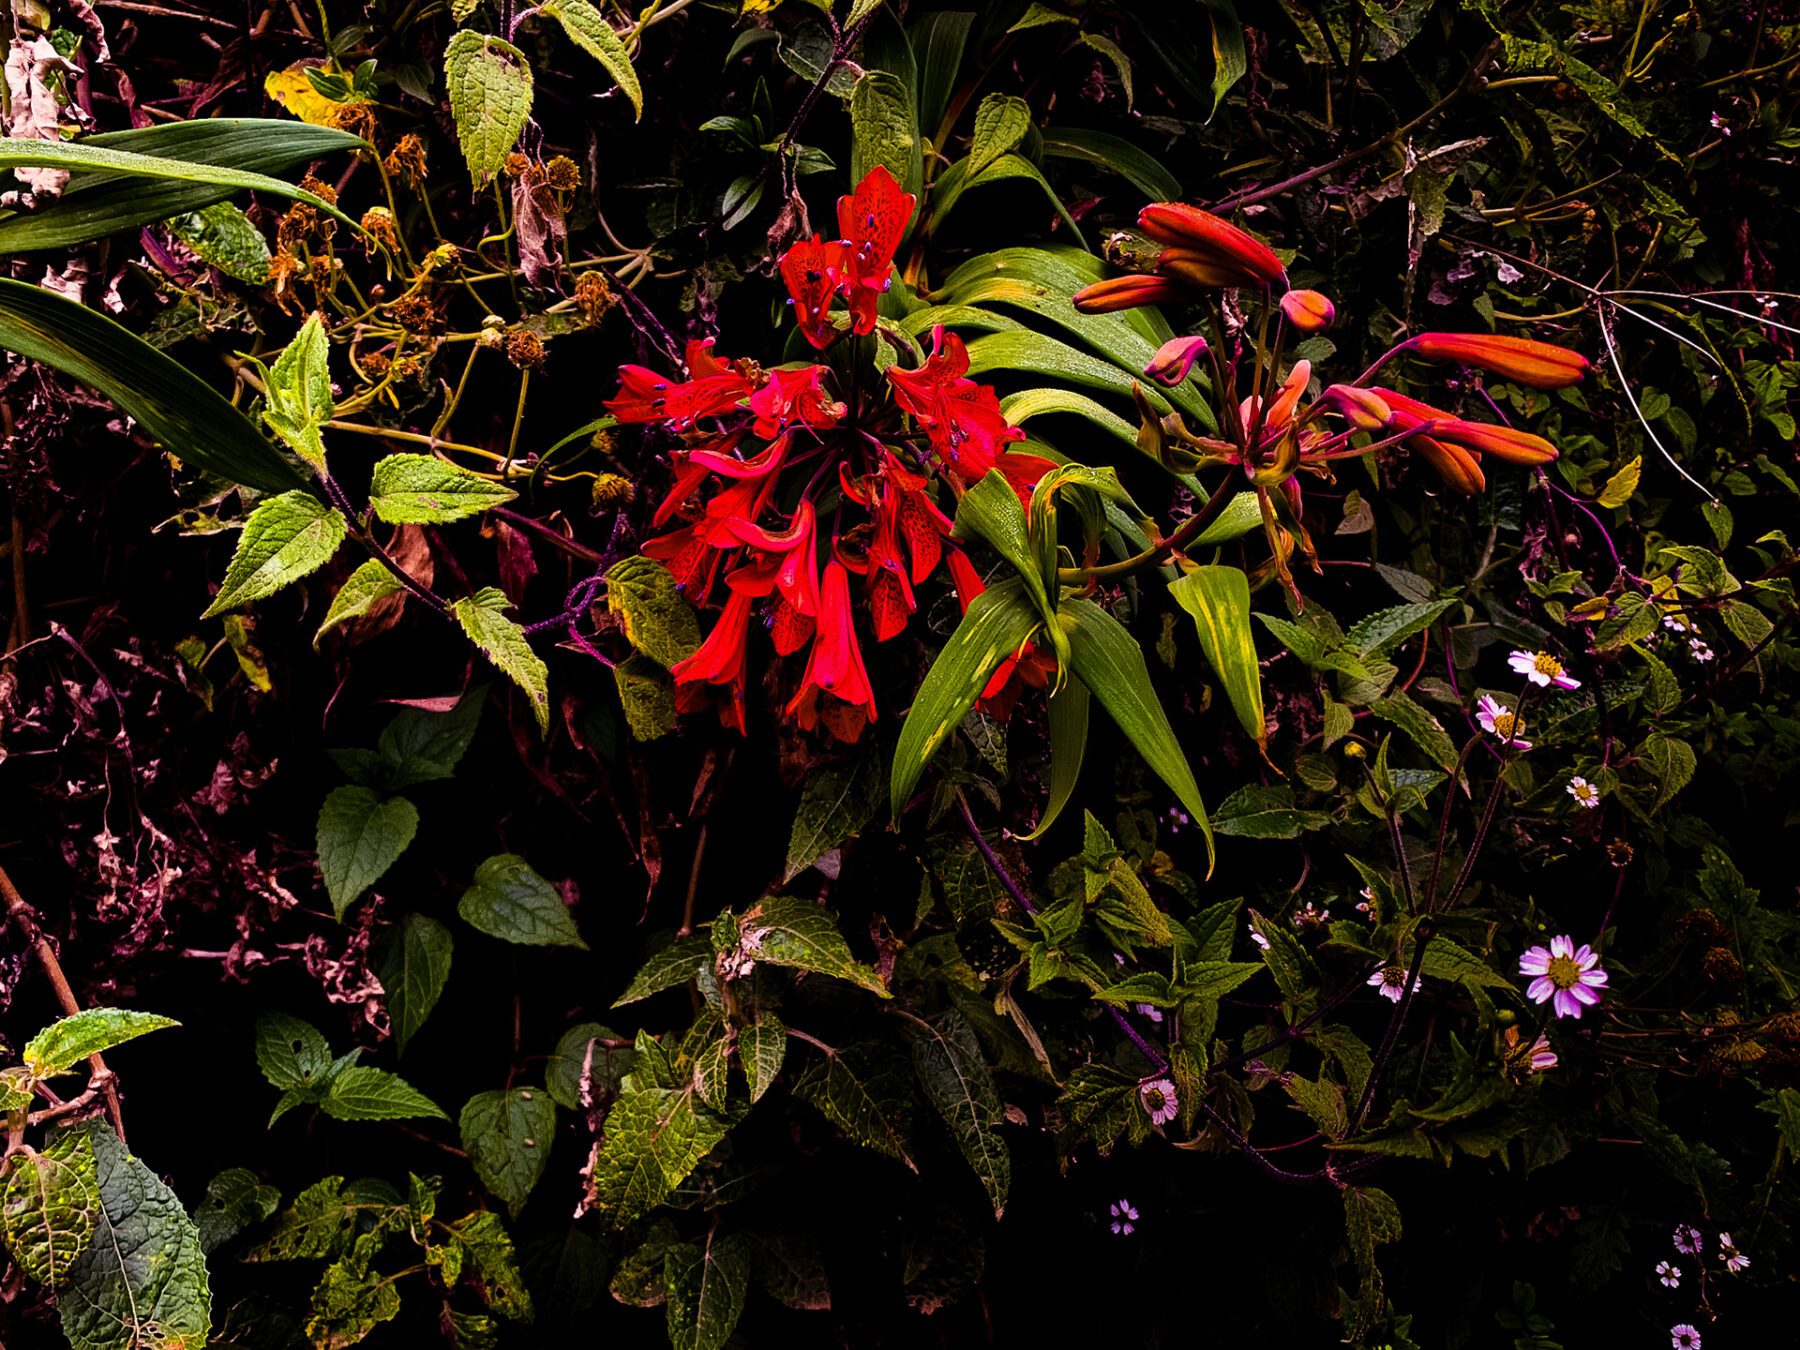 A red Panama flower on a tree.